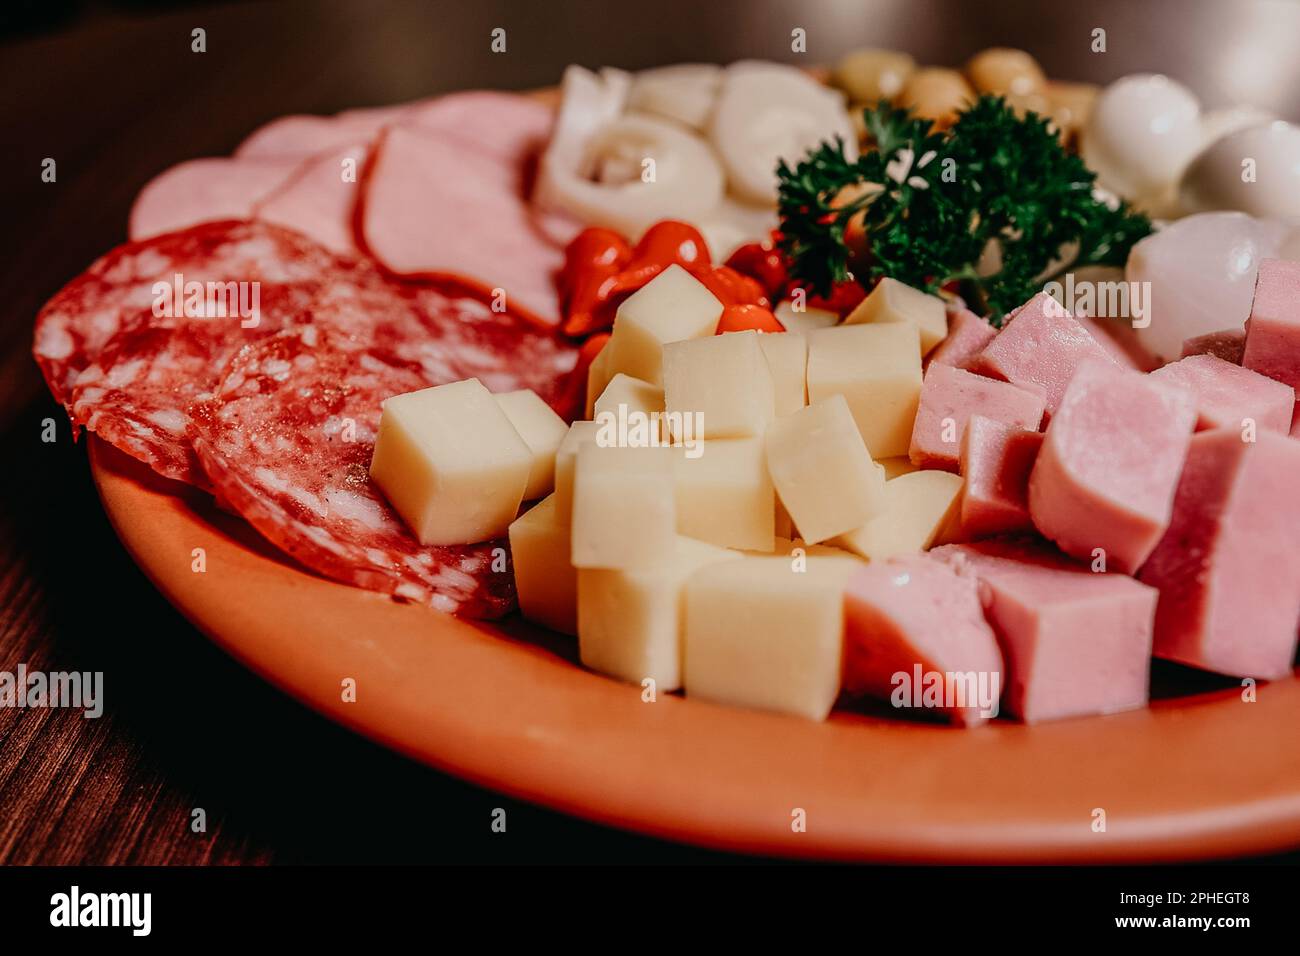 An assortment of various meats and cheeses arranged neatly on a plate, ready for cooking Stock Photo